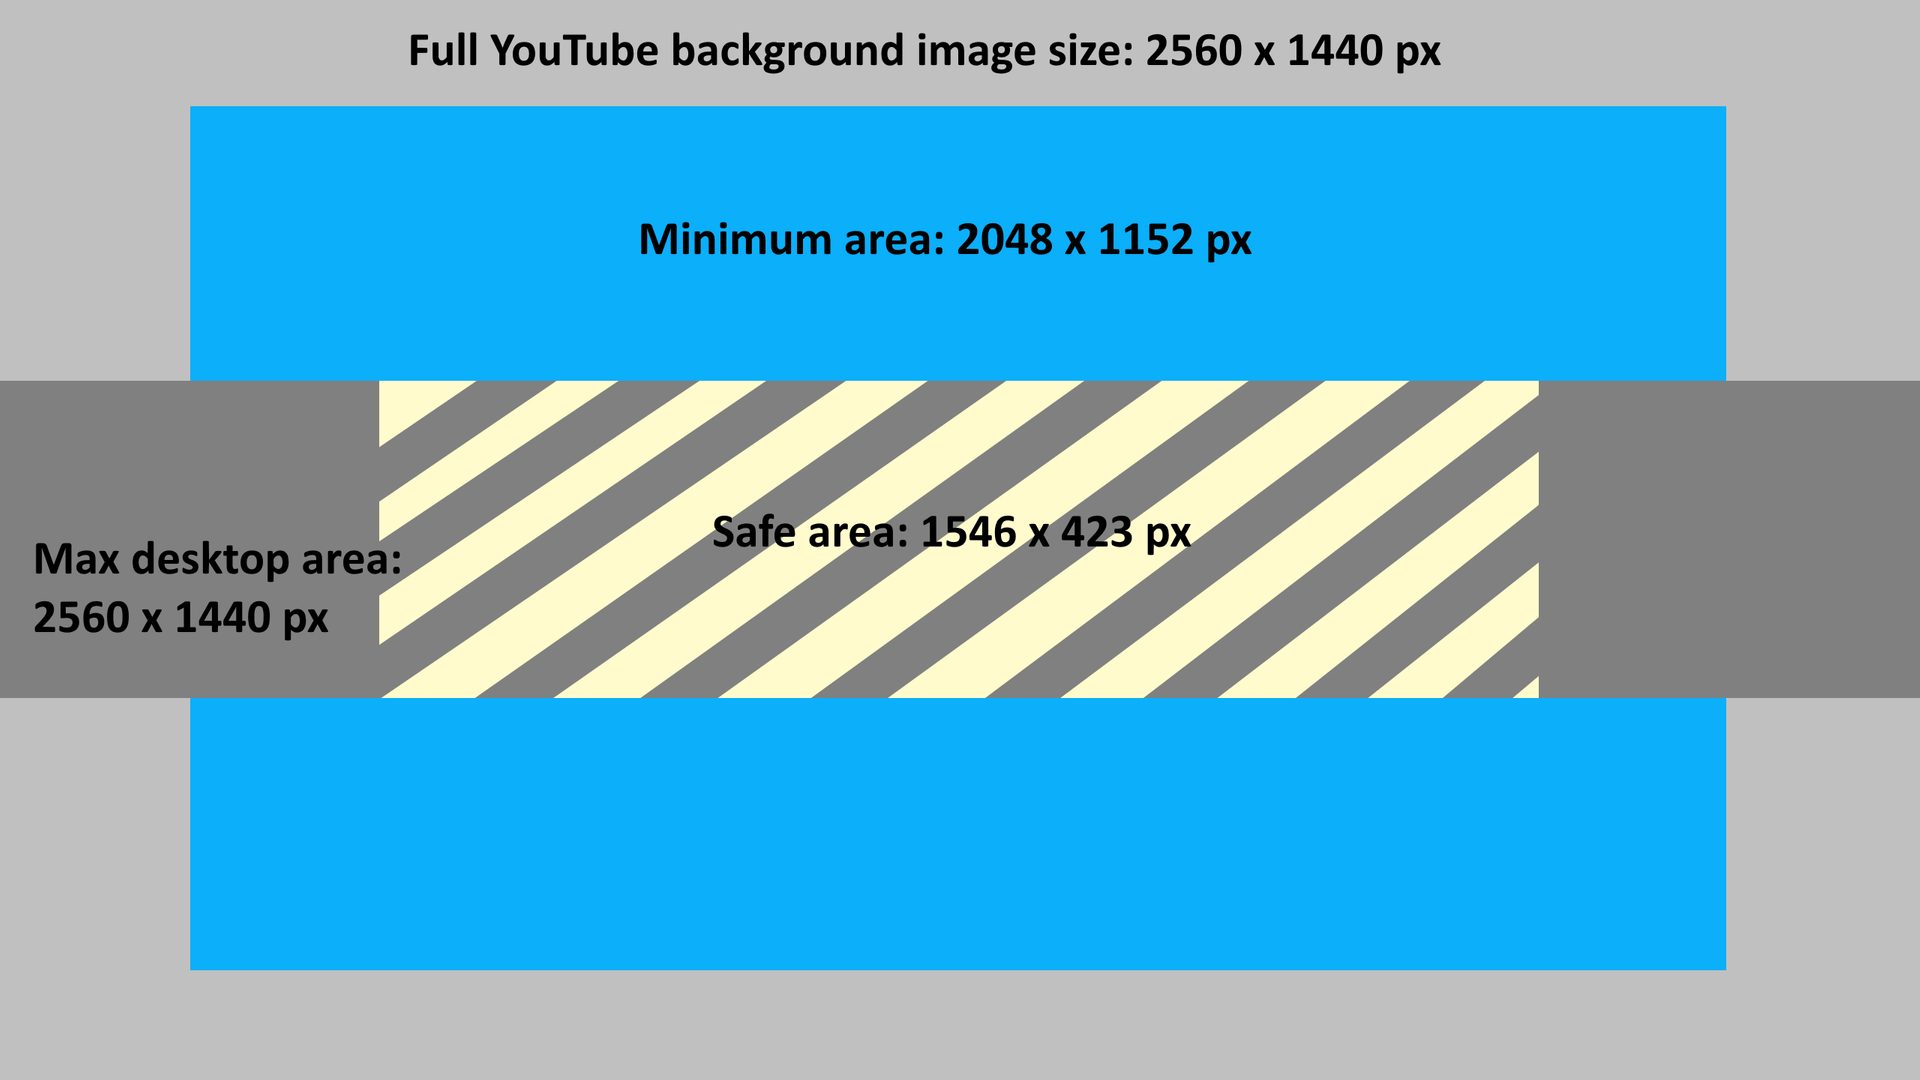 The Best Youtube Banner Size In 2020 + Best Practices For Regarding Youtube Banner Size Template